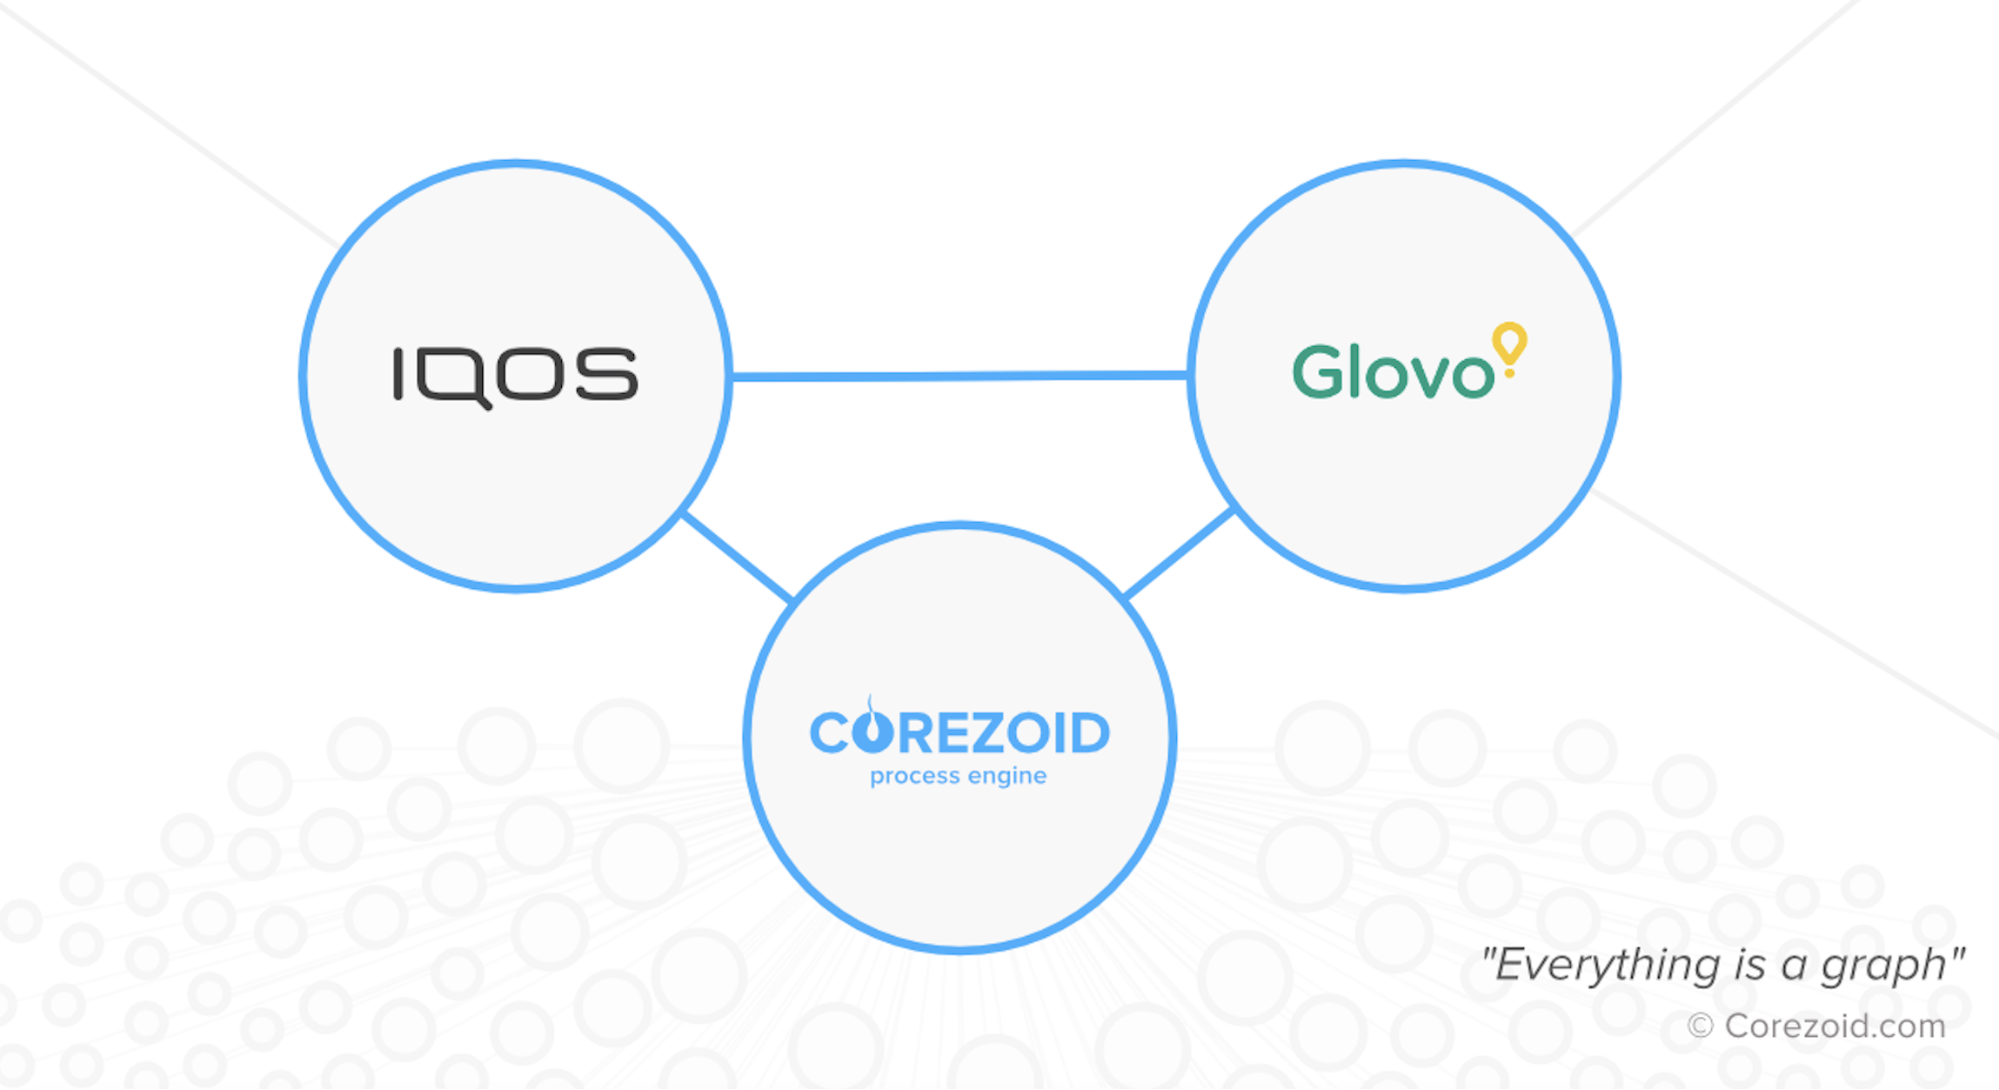 Glovo and IQOS announced partnership and launched the delivery of sticks and gadgets